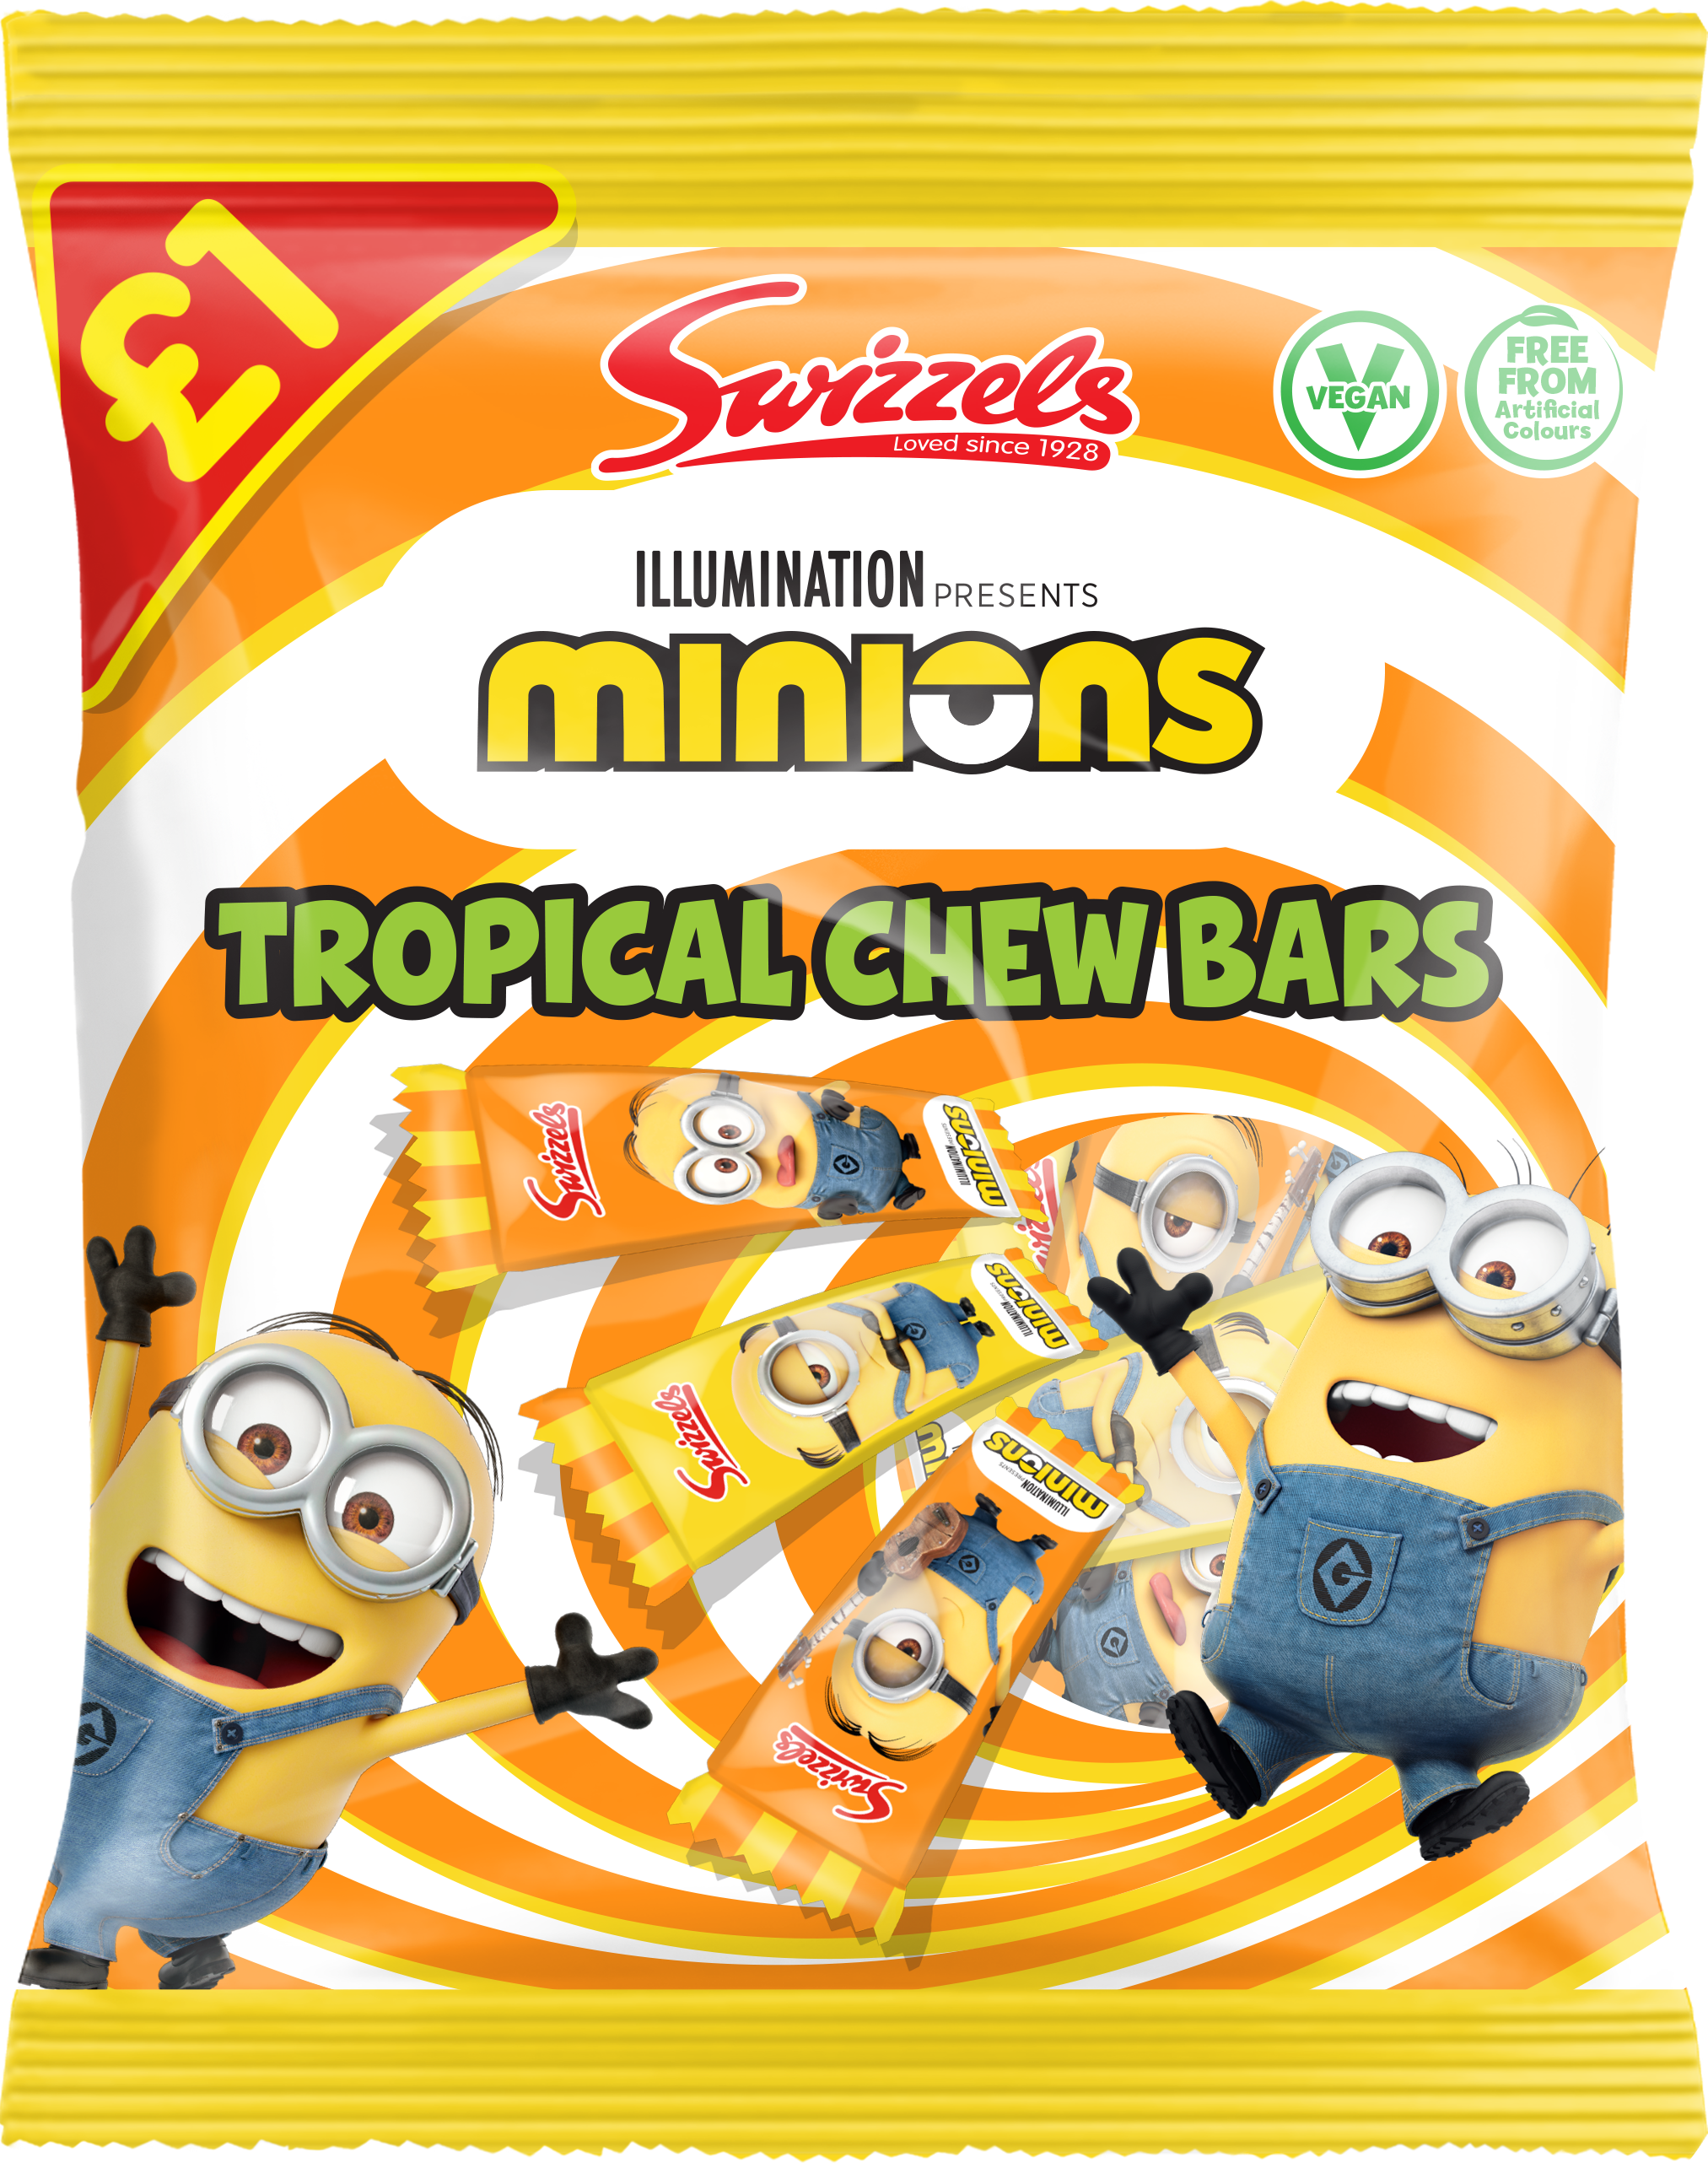 Swizzels unleashes Minions, inspired by movie 'Minions: The Rise of Gru'